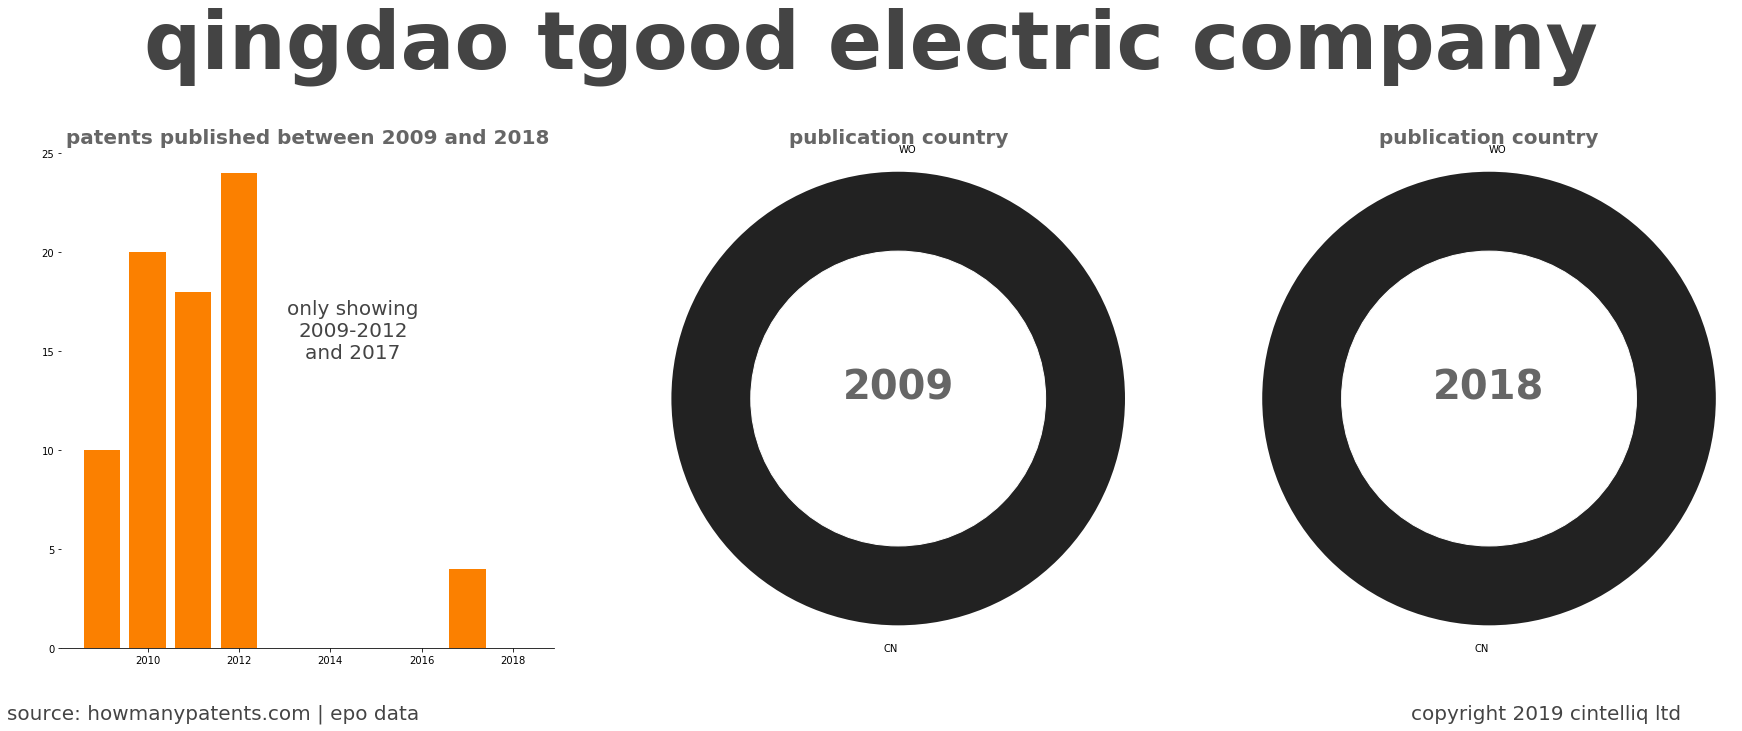 summary of patents for Qingdao Tgood Electric Company